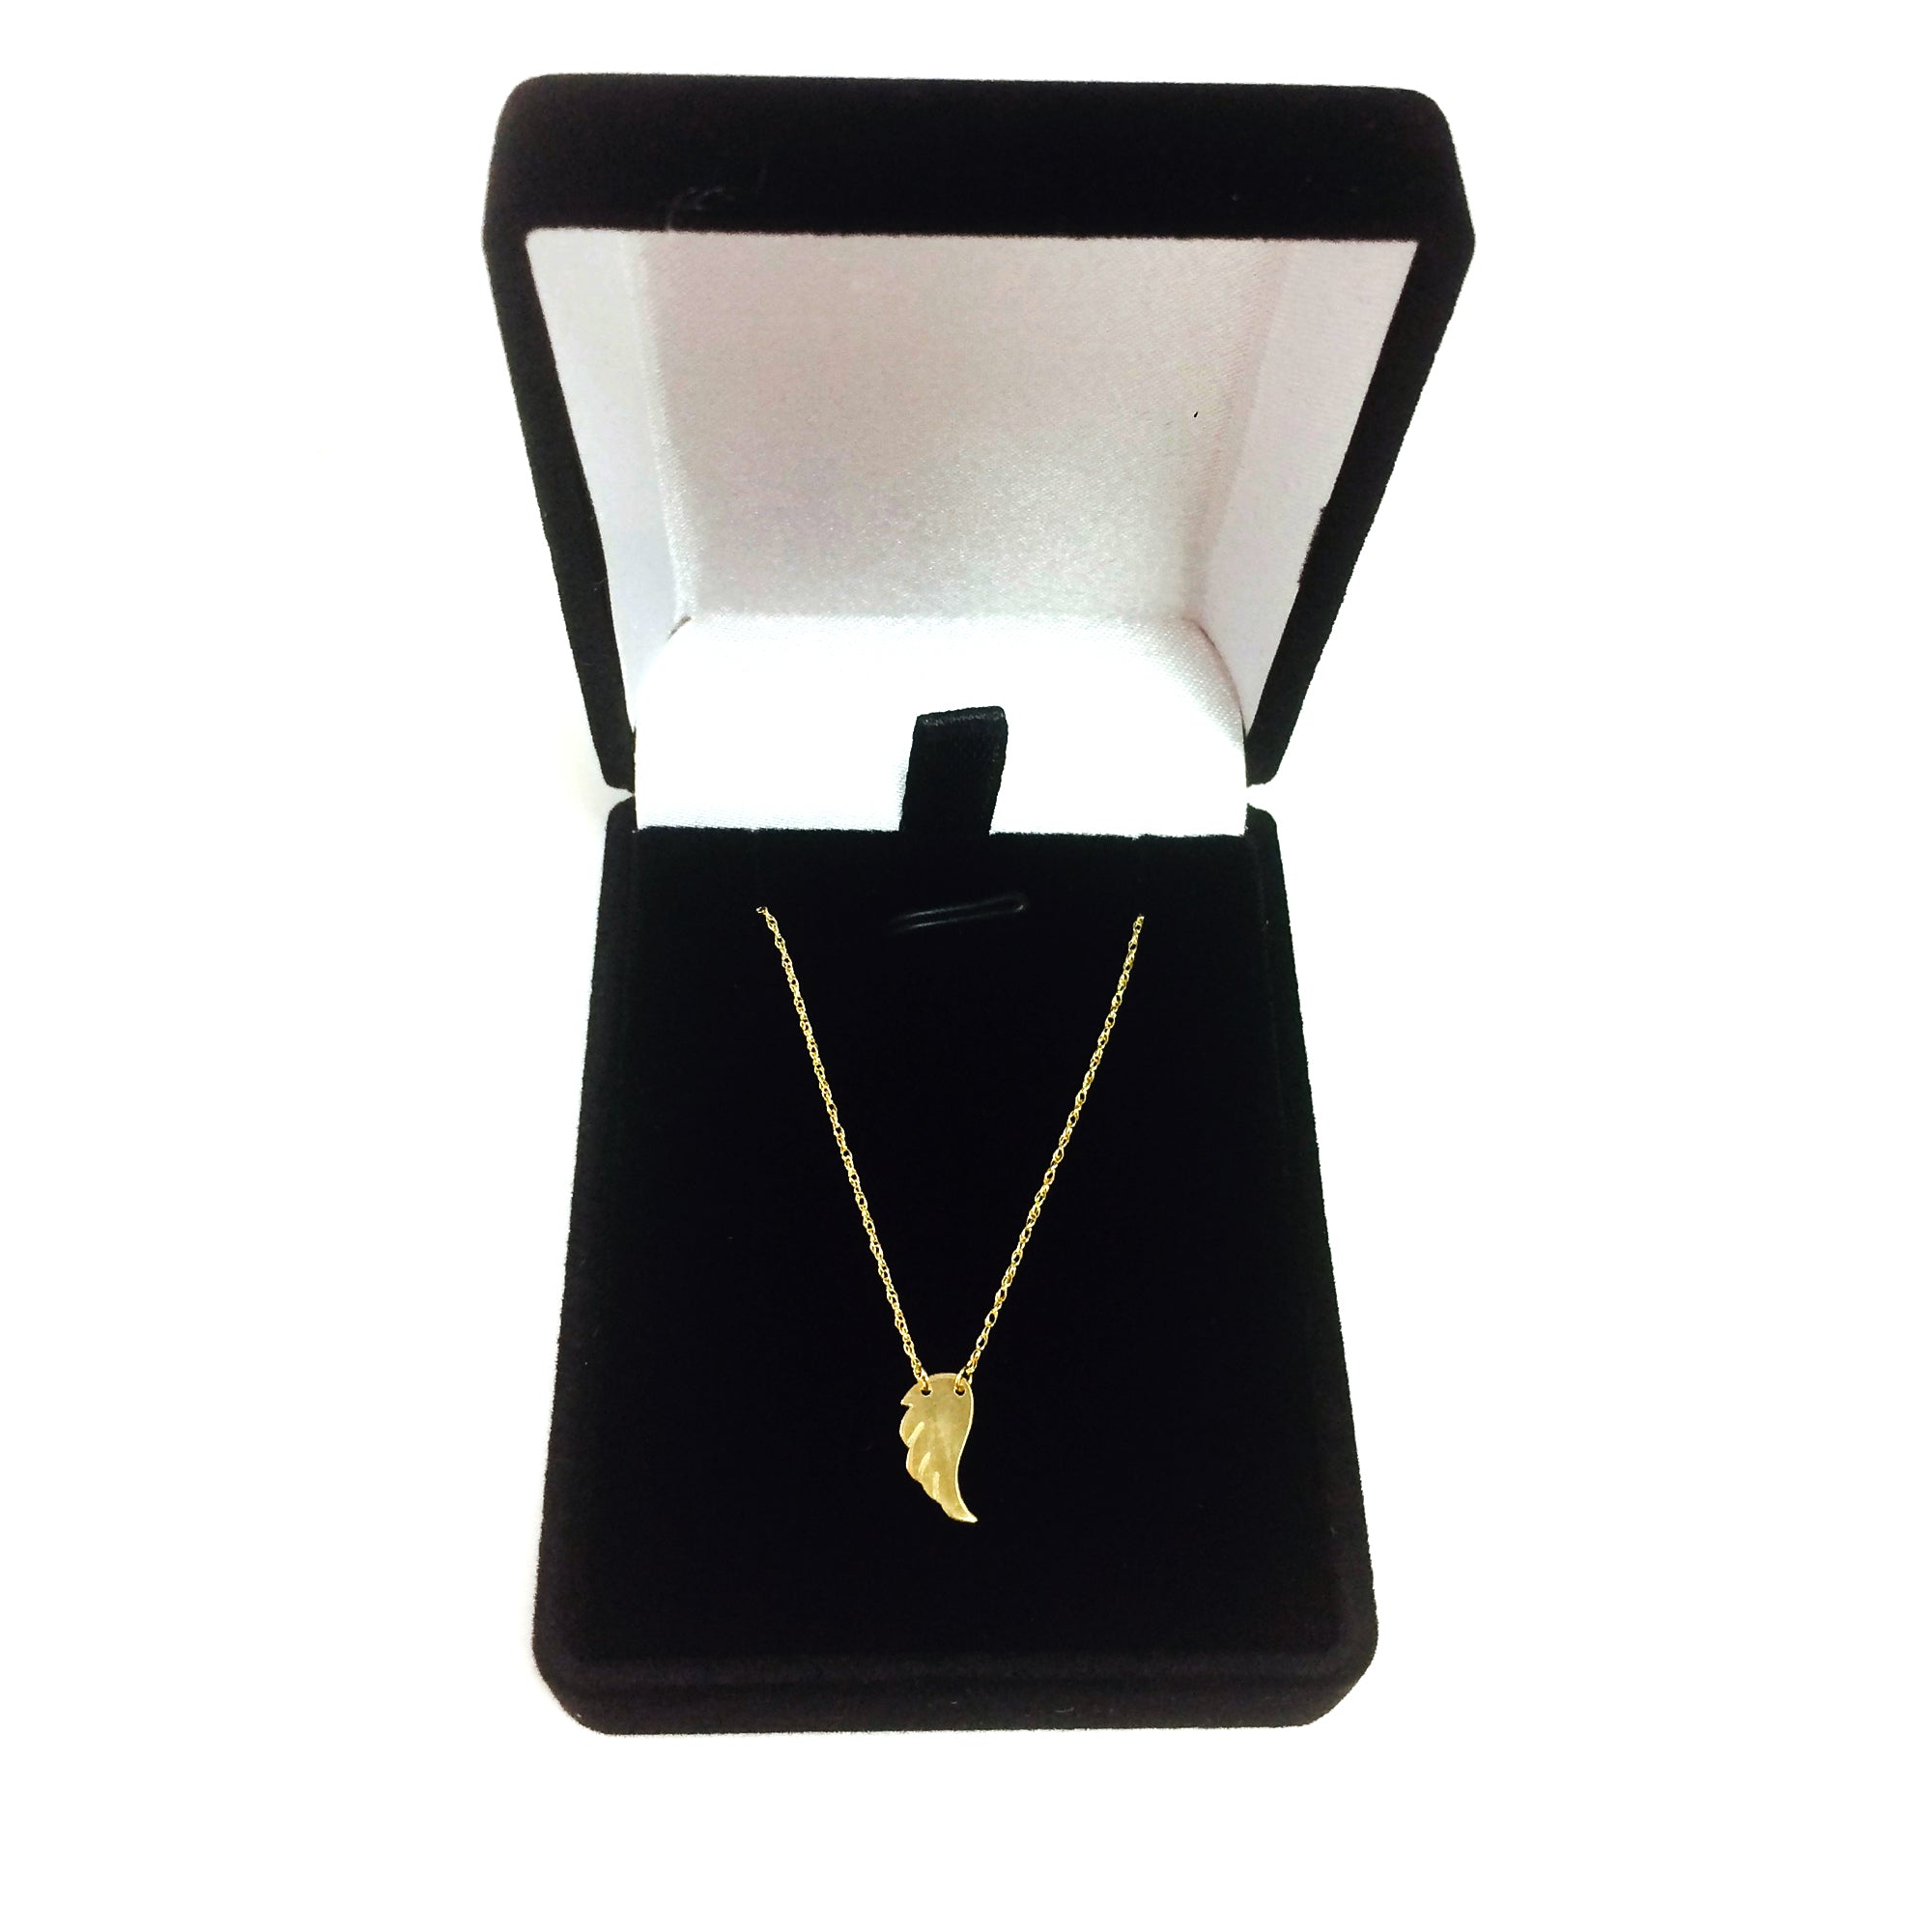 14K Yellow Gold Mini Wing Pendant Necklace, 16" To 18" Adjustable